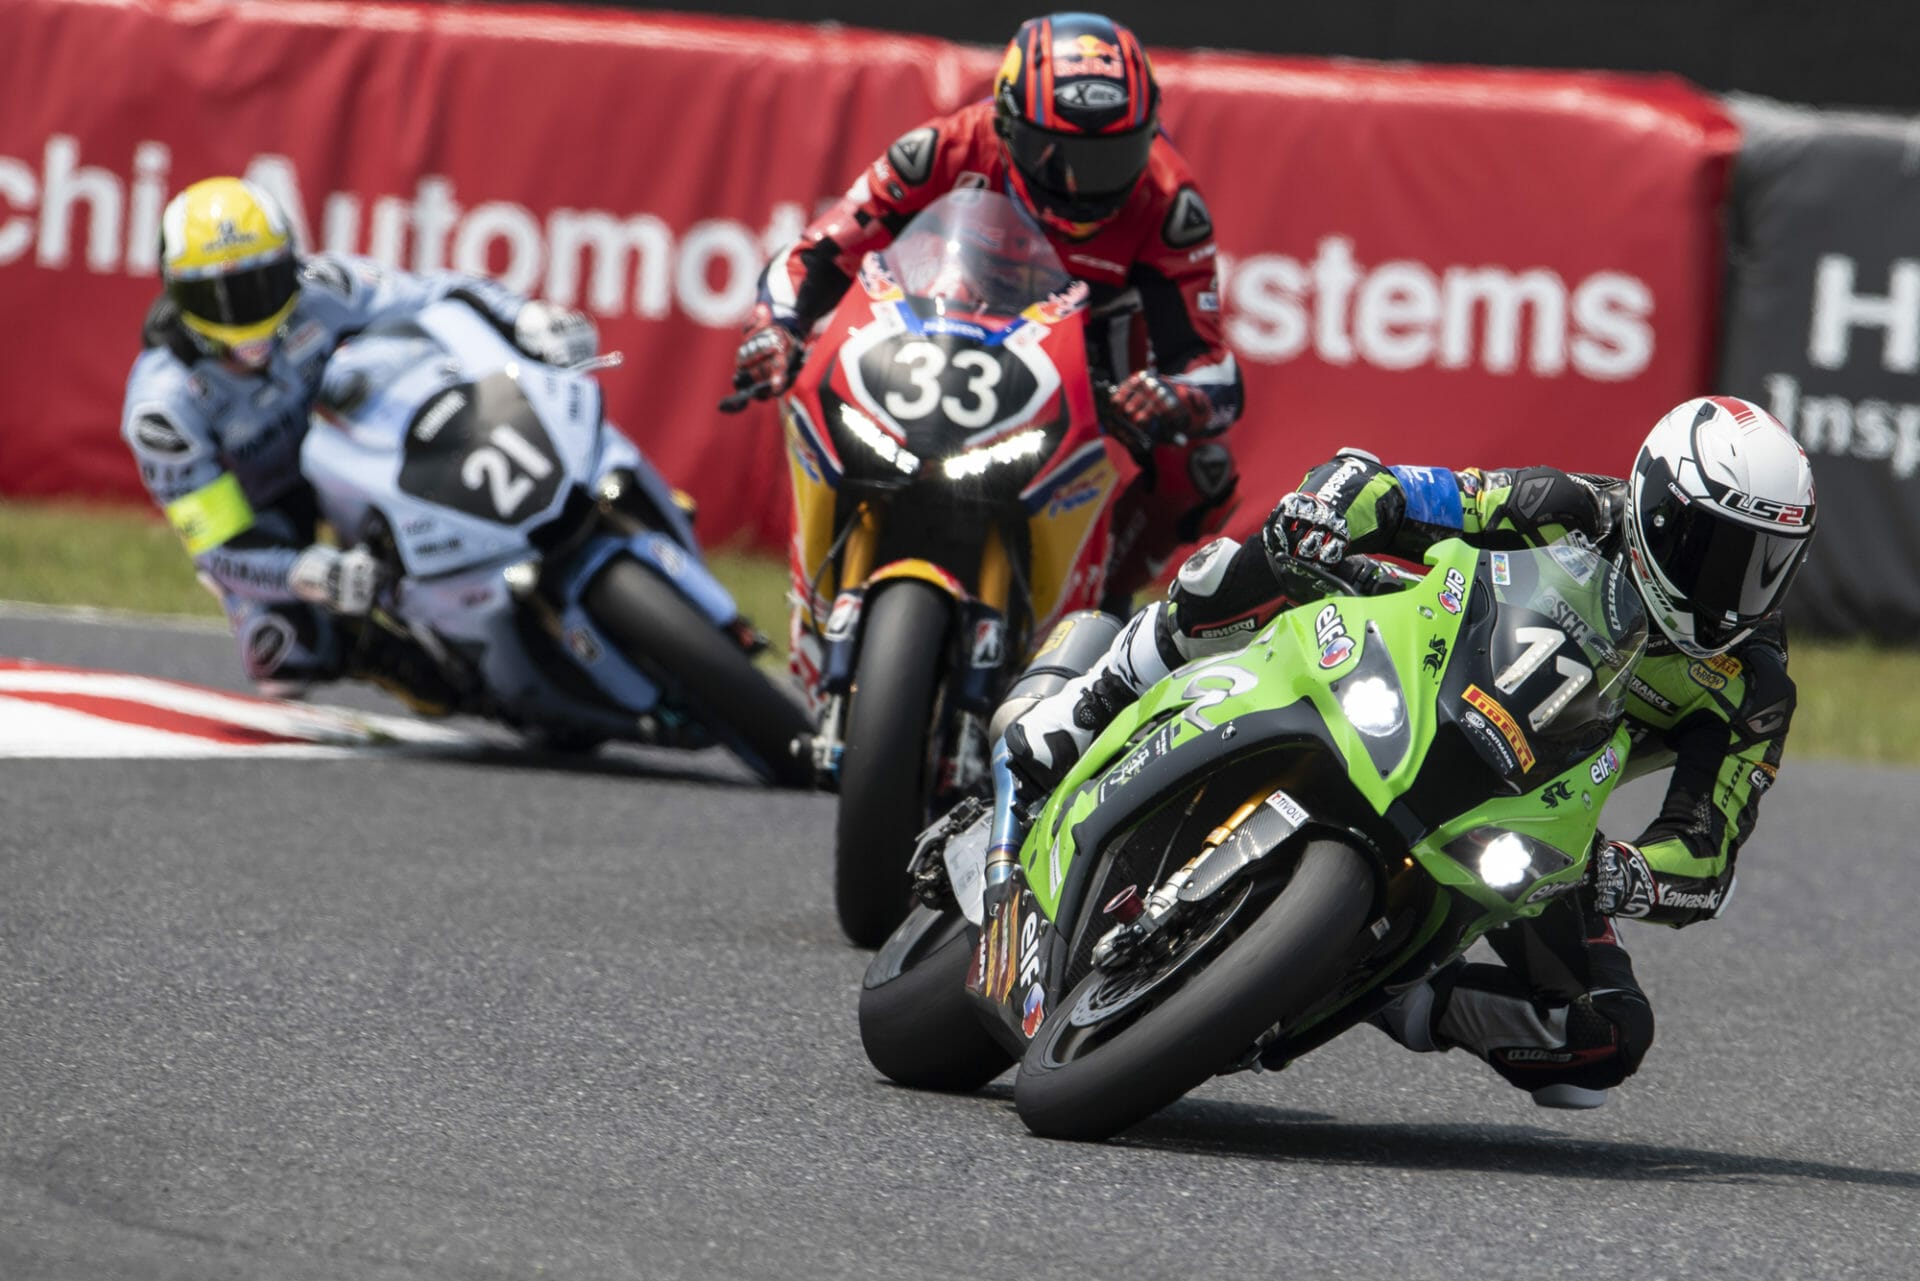 Suzuka 8 Hours must be postponed
- also in the MOTORCYCLES.NEWS APP